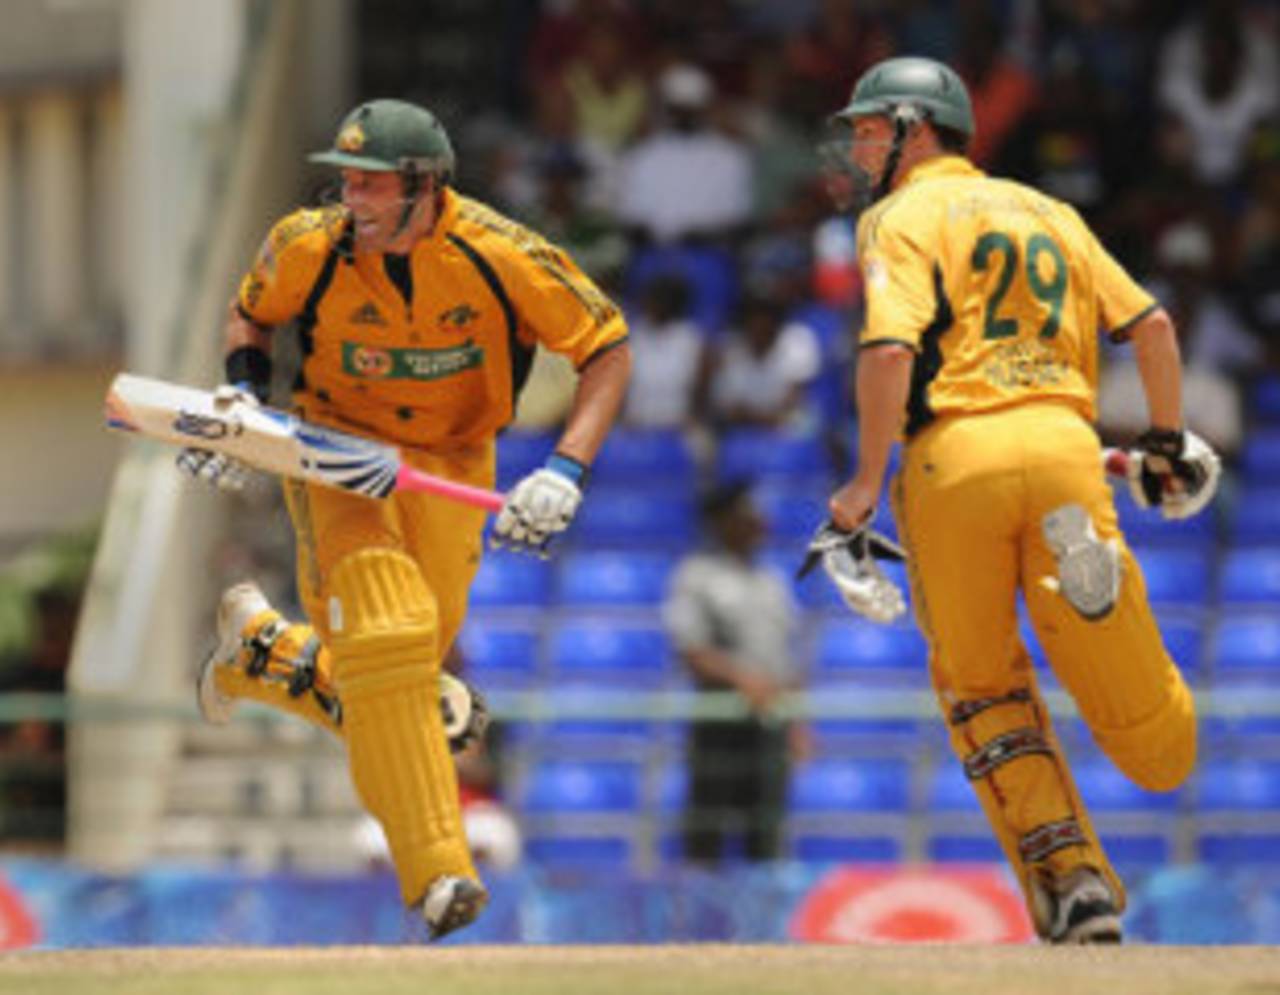 Ted Hussey's sons Michael and David, batting together for the first time at the international level&nbsp;&nbsp;&bull;&nbsp;&nbsp;AFP